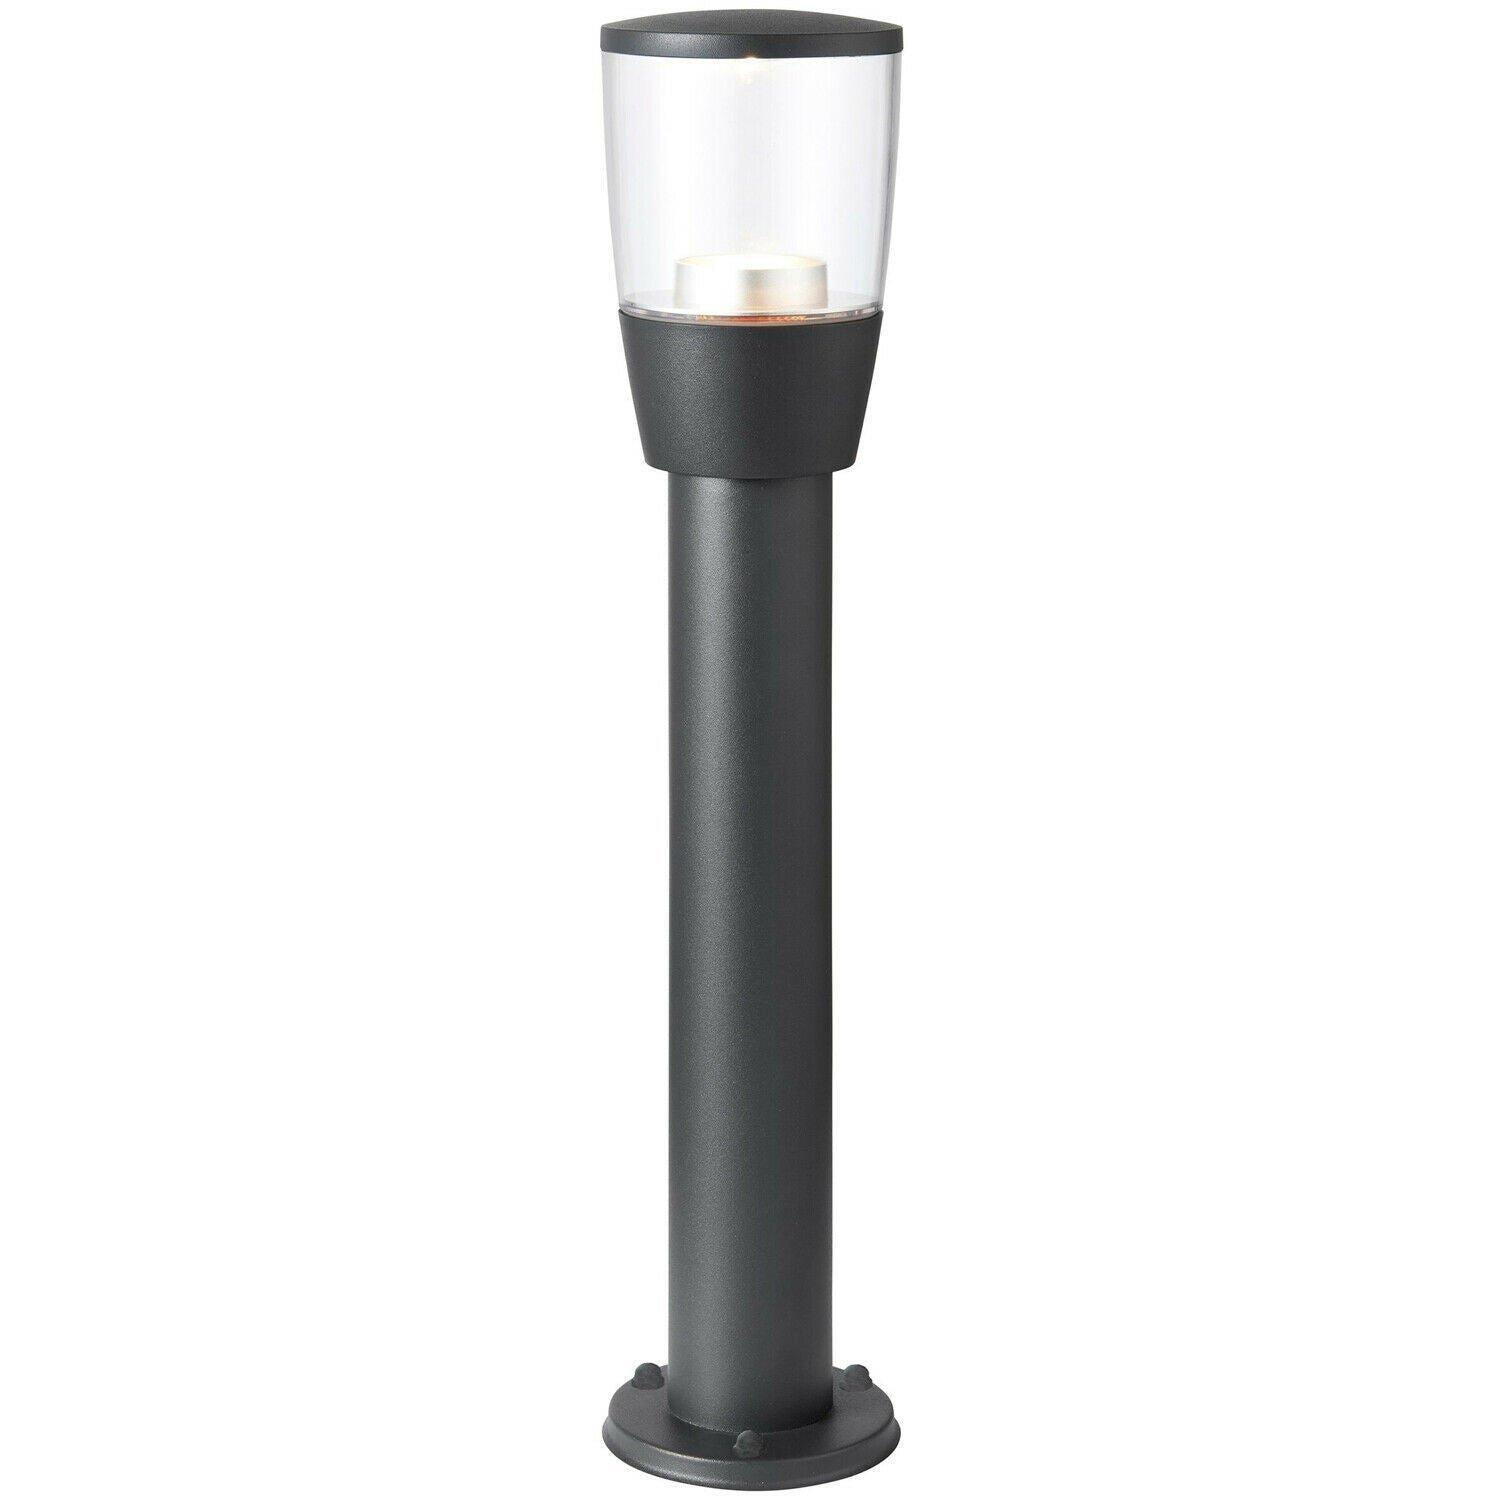 Outdoor Post Bollard Light Anthracite 0.5m LED Garden Driveway Foot Path Lamp - image 1